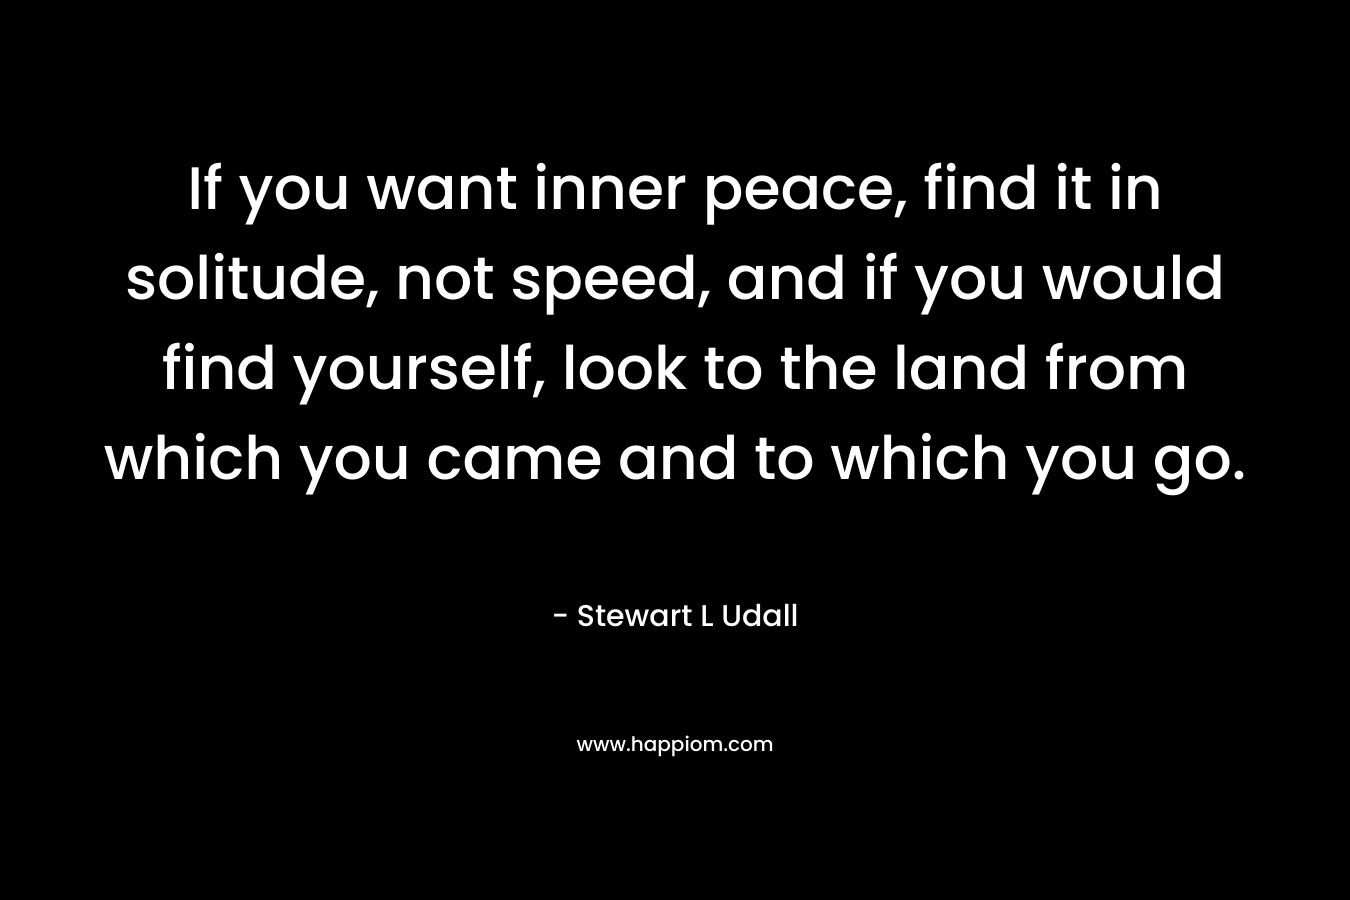 If you want inner peace, find it in solitude, not speed, and if you would find yourself, look to the land from which you came and to which you go. – Stewart L Udall